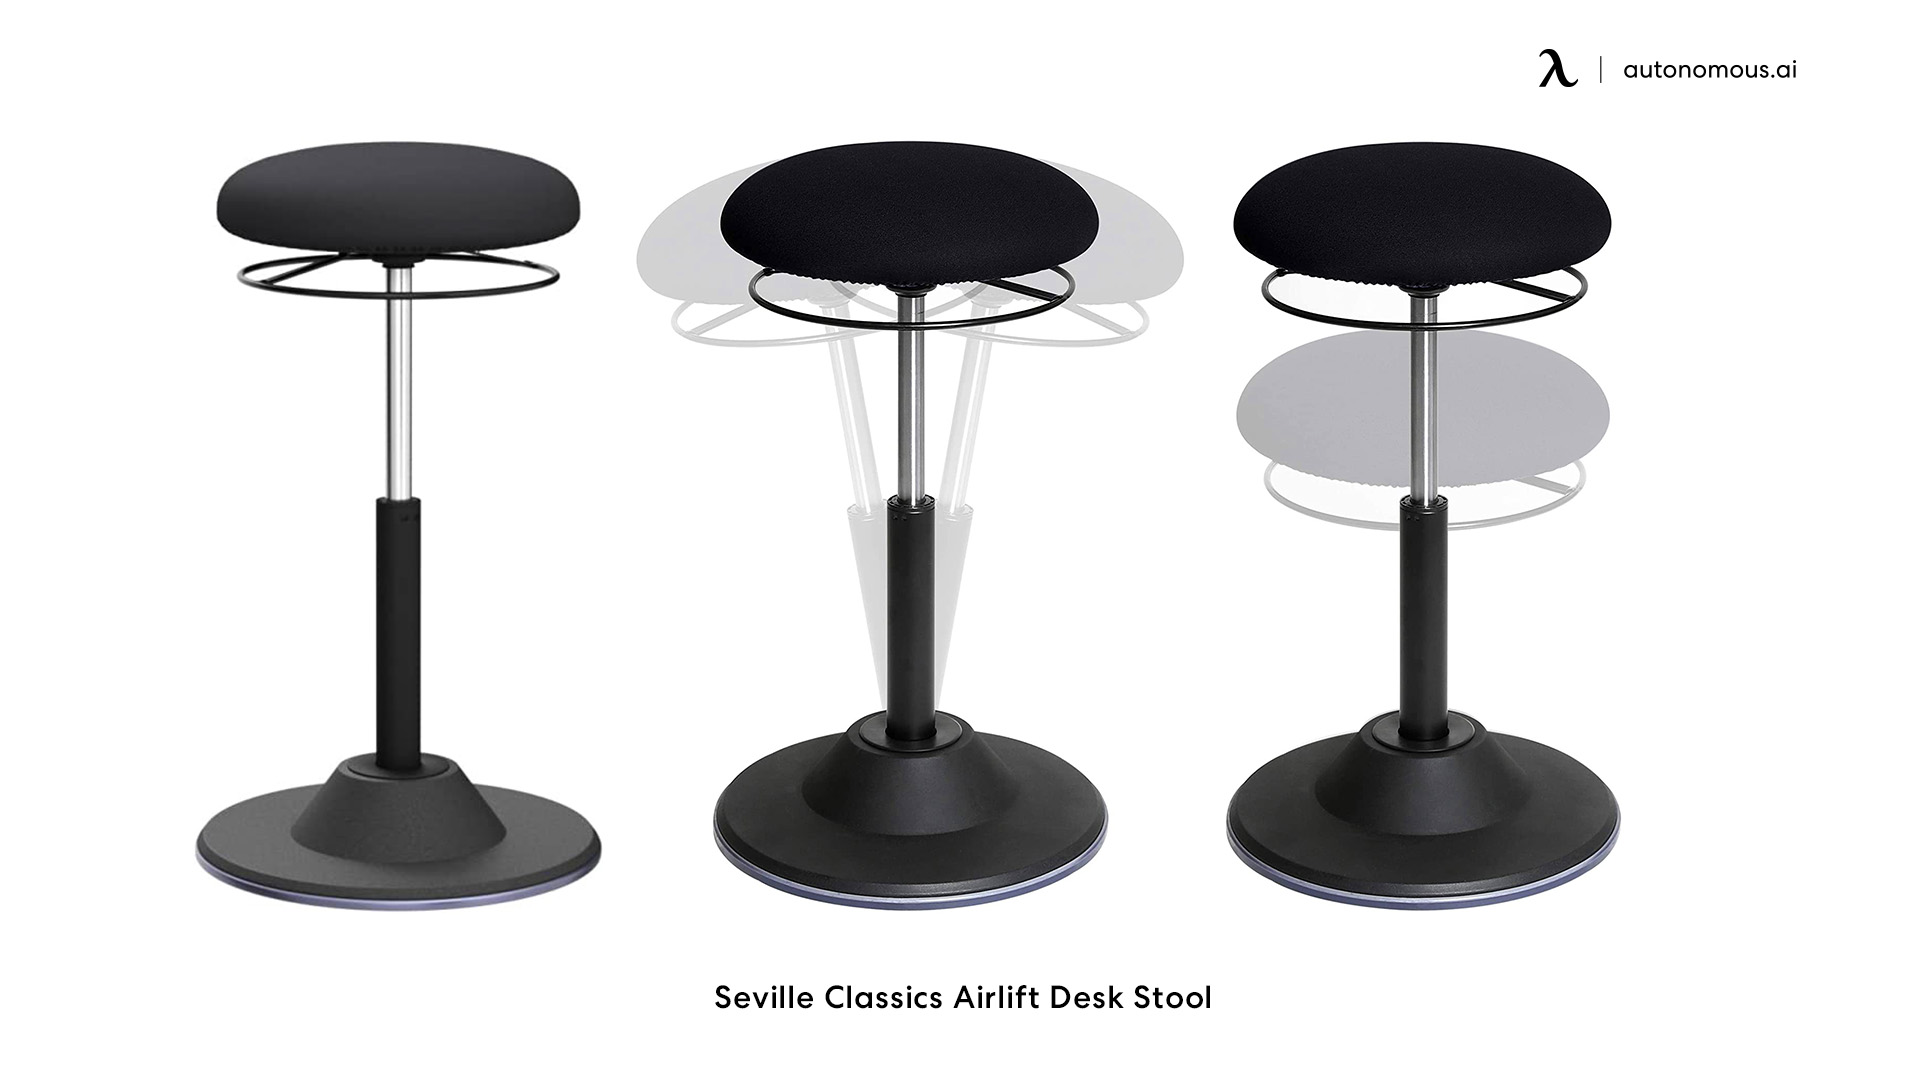 Seville Classics tall chair for standing desk